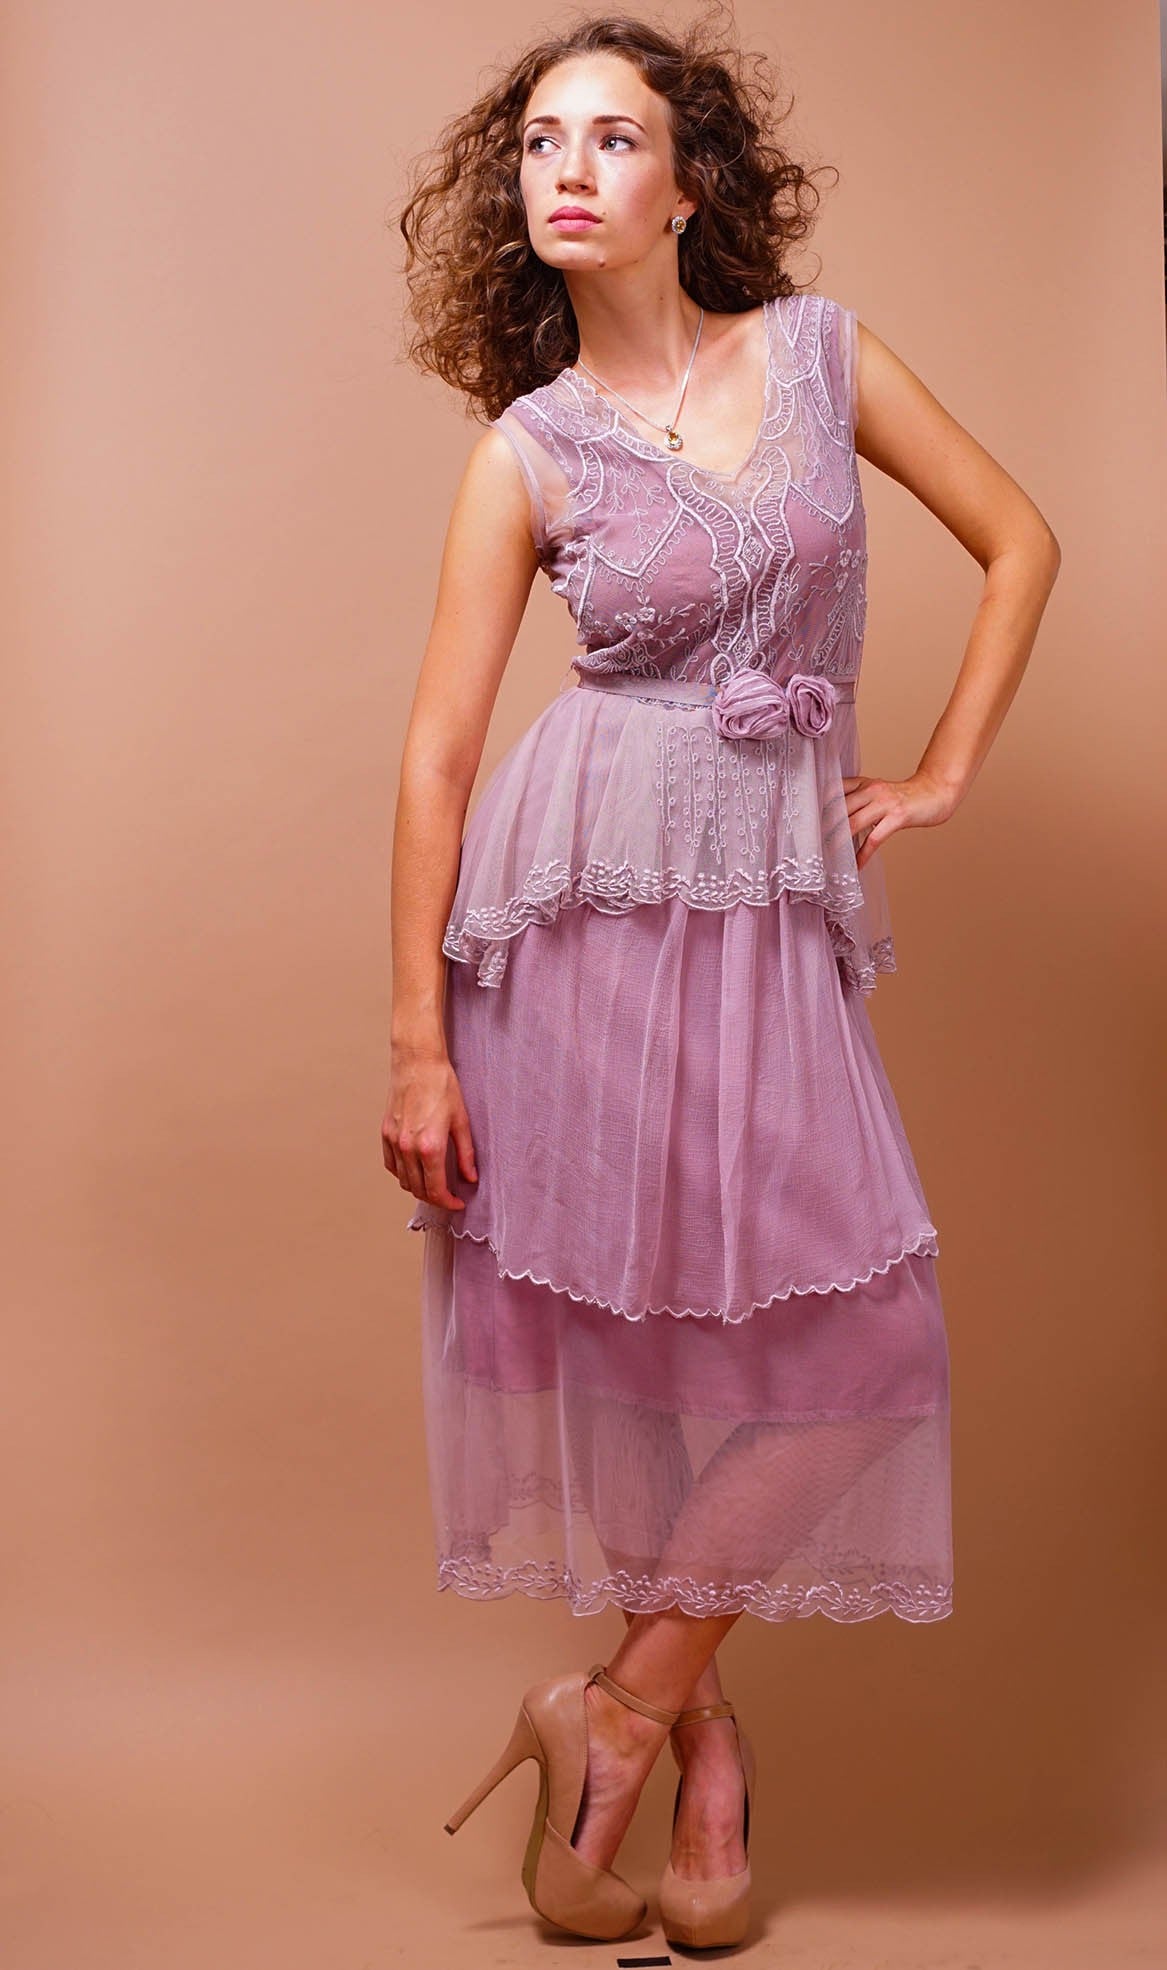 Vintage Inspired Tiered Tea Party Dress in Lavender-Rose - SOLD OUTby Nataya